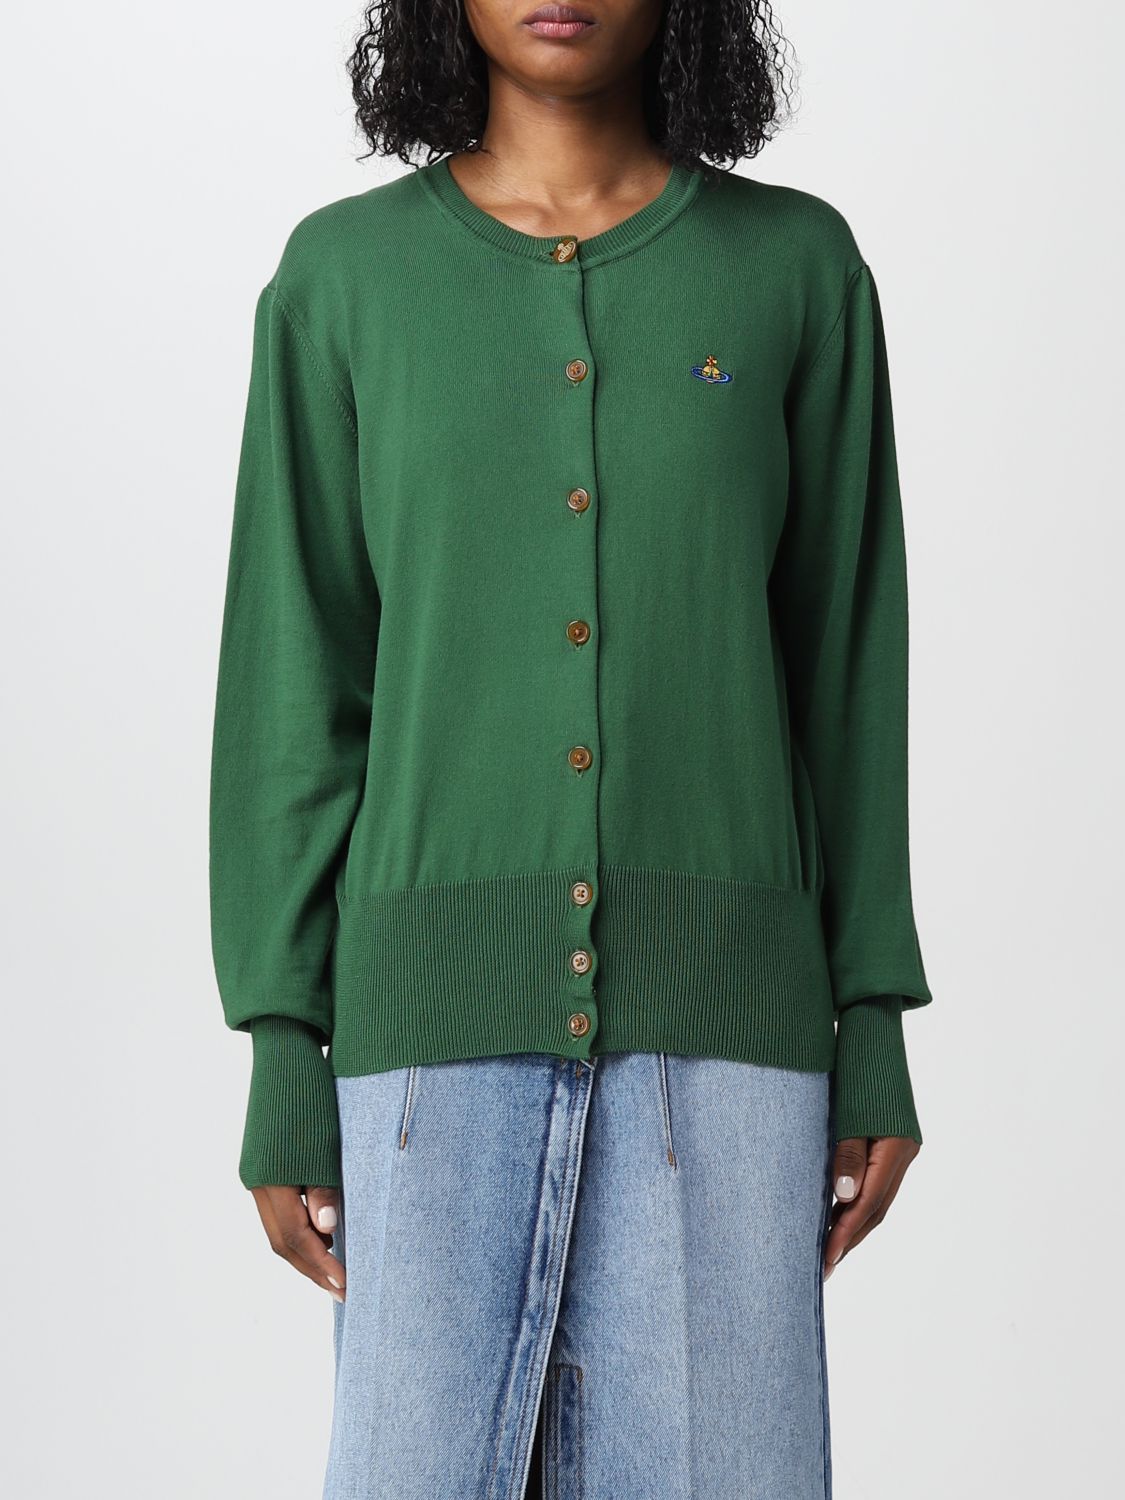 Vivienne Westwood Orb Embroidered Knit Cardigan In Green